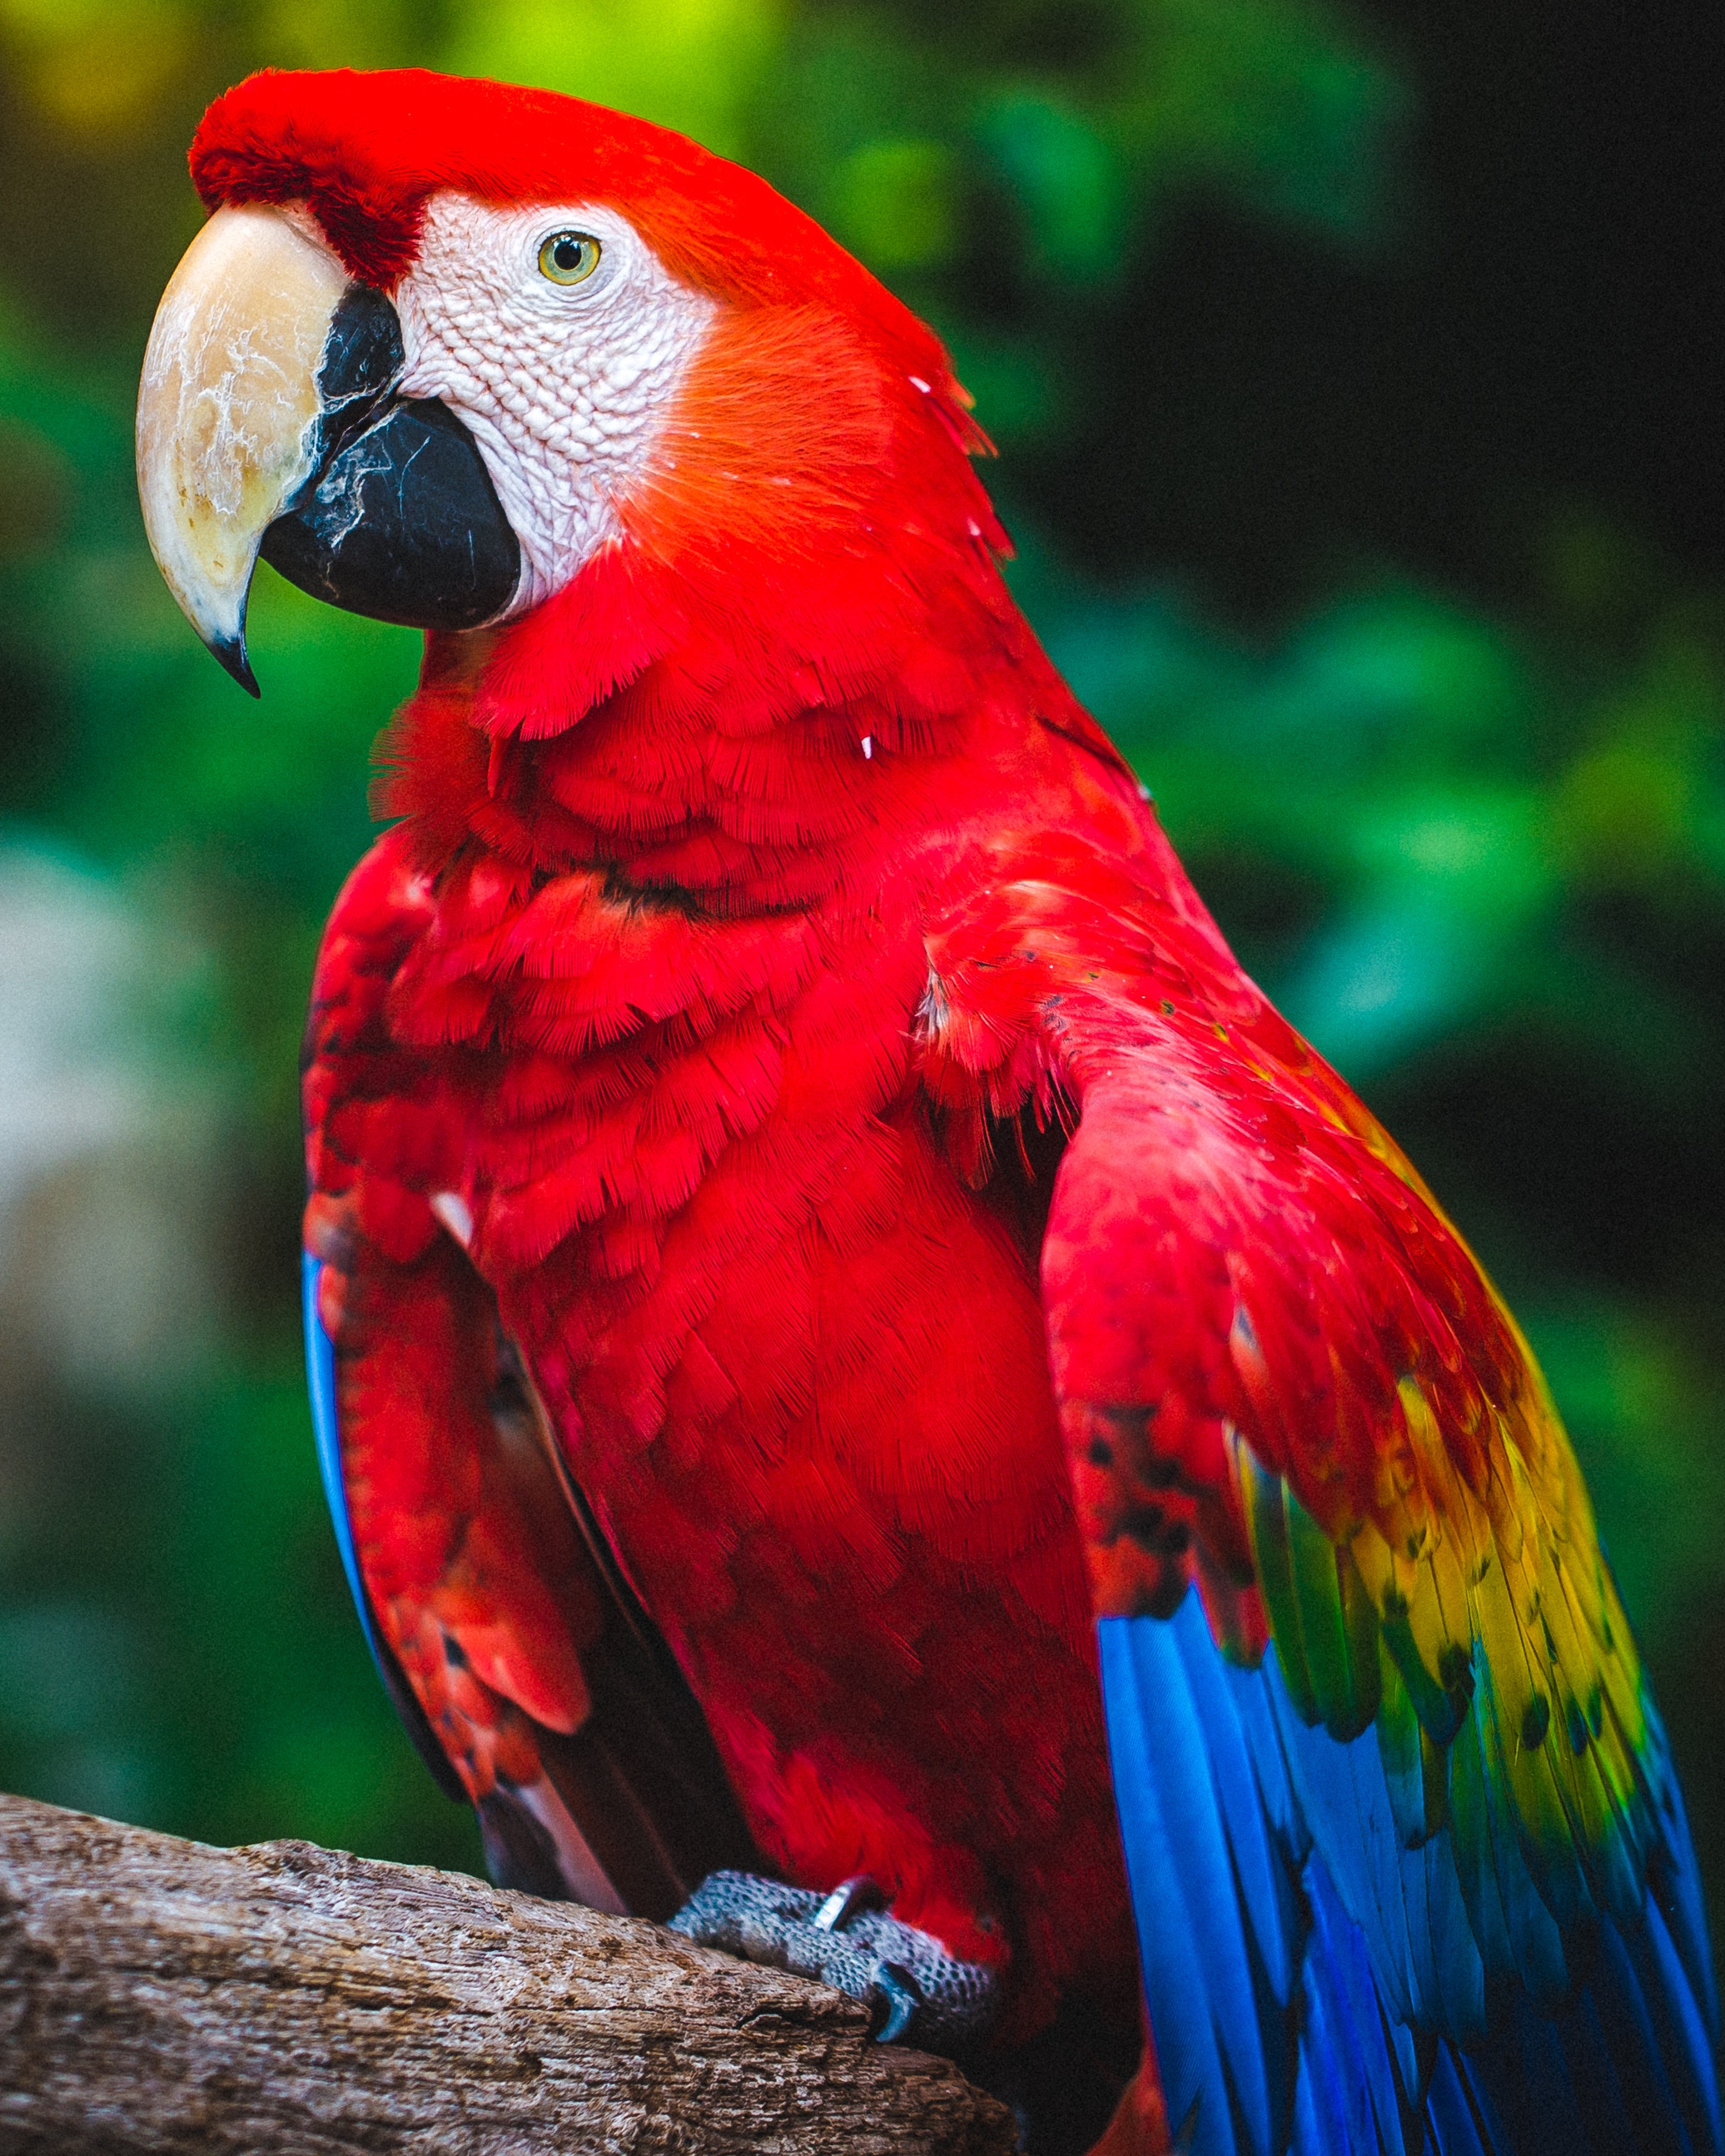 149842 download wallpaper color, red, animals, parrots, bird, beak, macaw screensavers and pictures for free